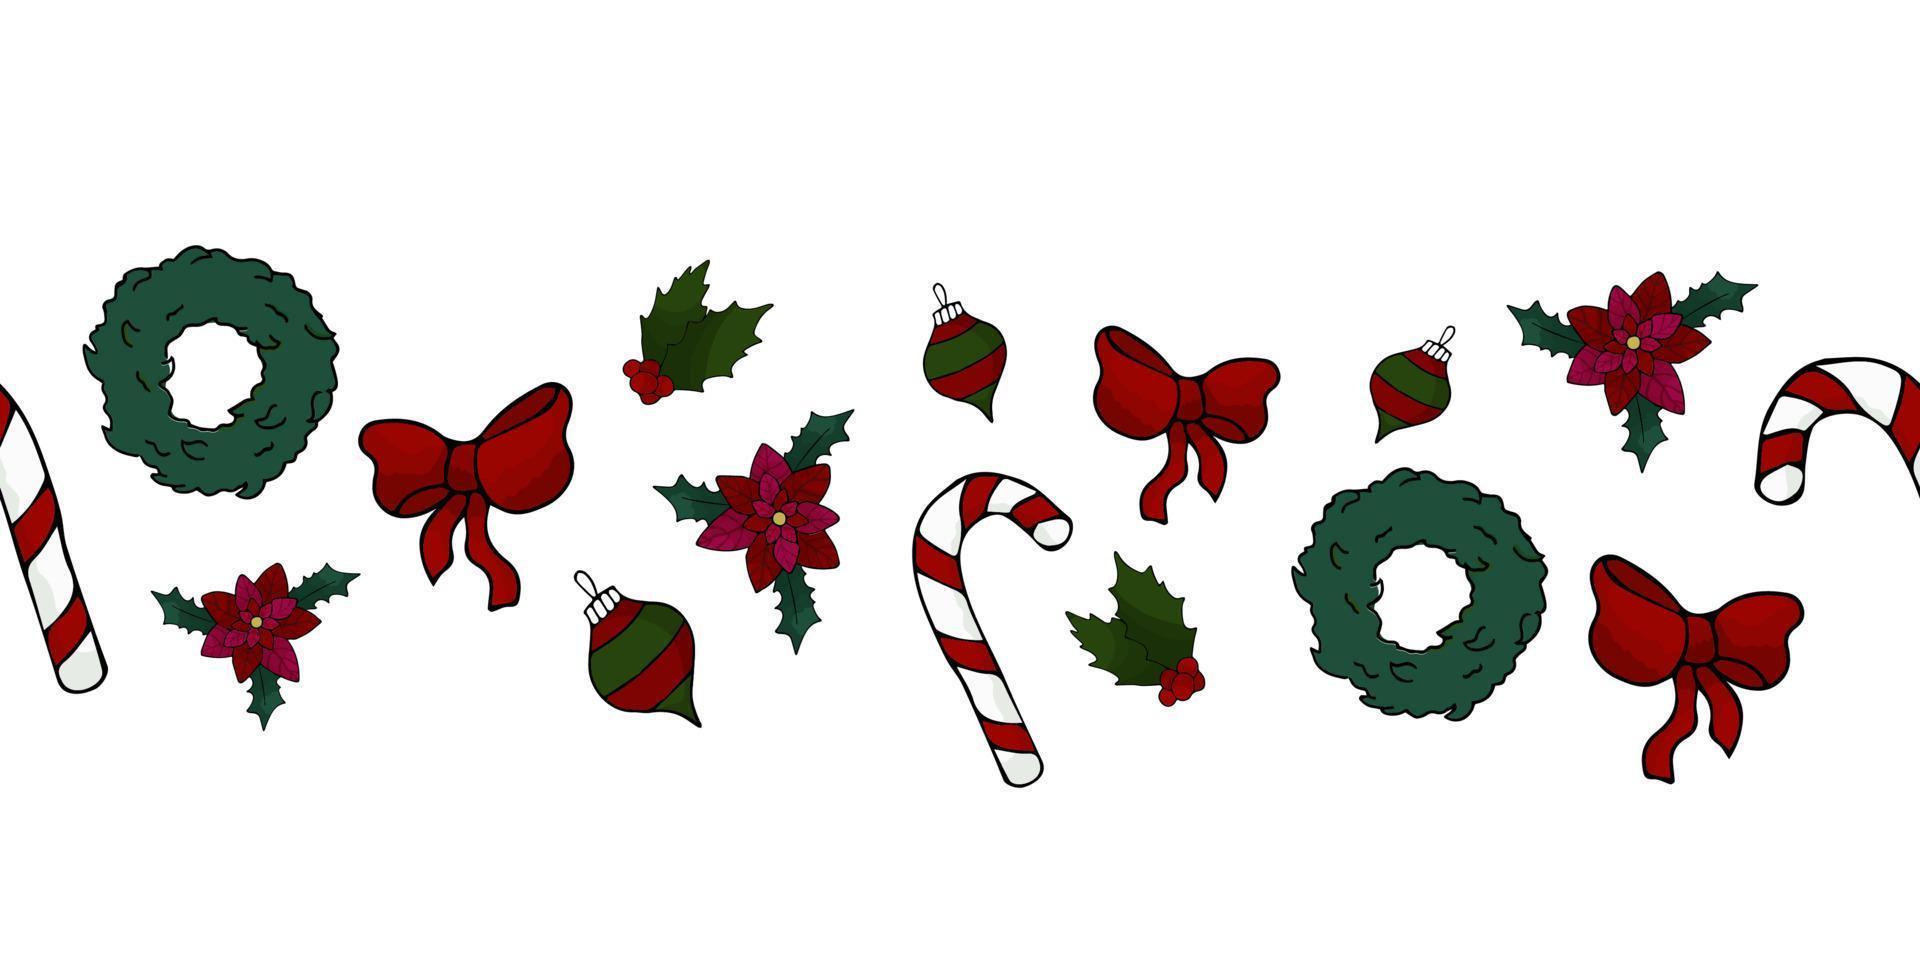 merry christmas. border template with holly, wreath, candy. hand drawing style. vector illustration